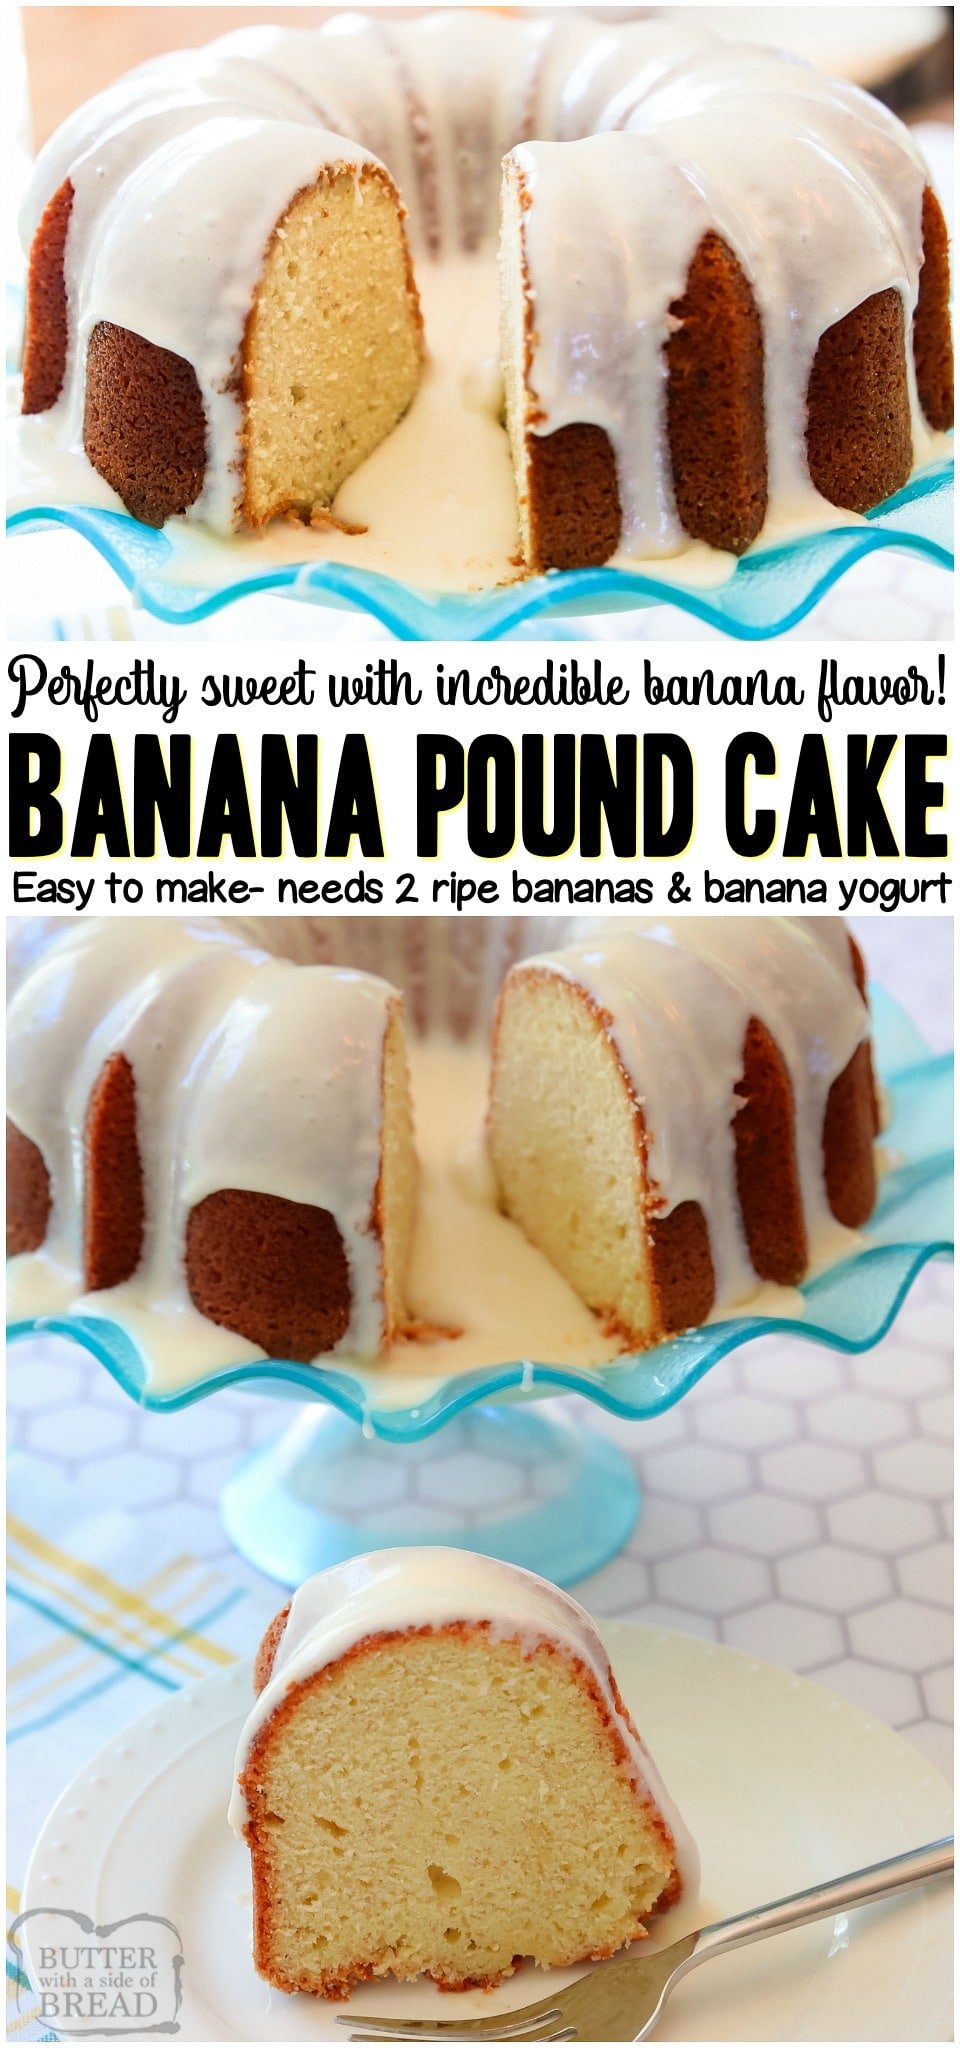 Banana Pound Cake recipe with the most incredible banana flavors ever! Sweet pound cake made with ripe bananas and banana yogurt and topped with a vanilla glaze.